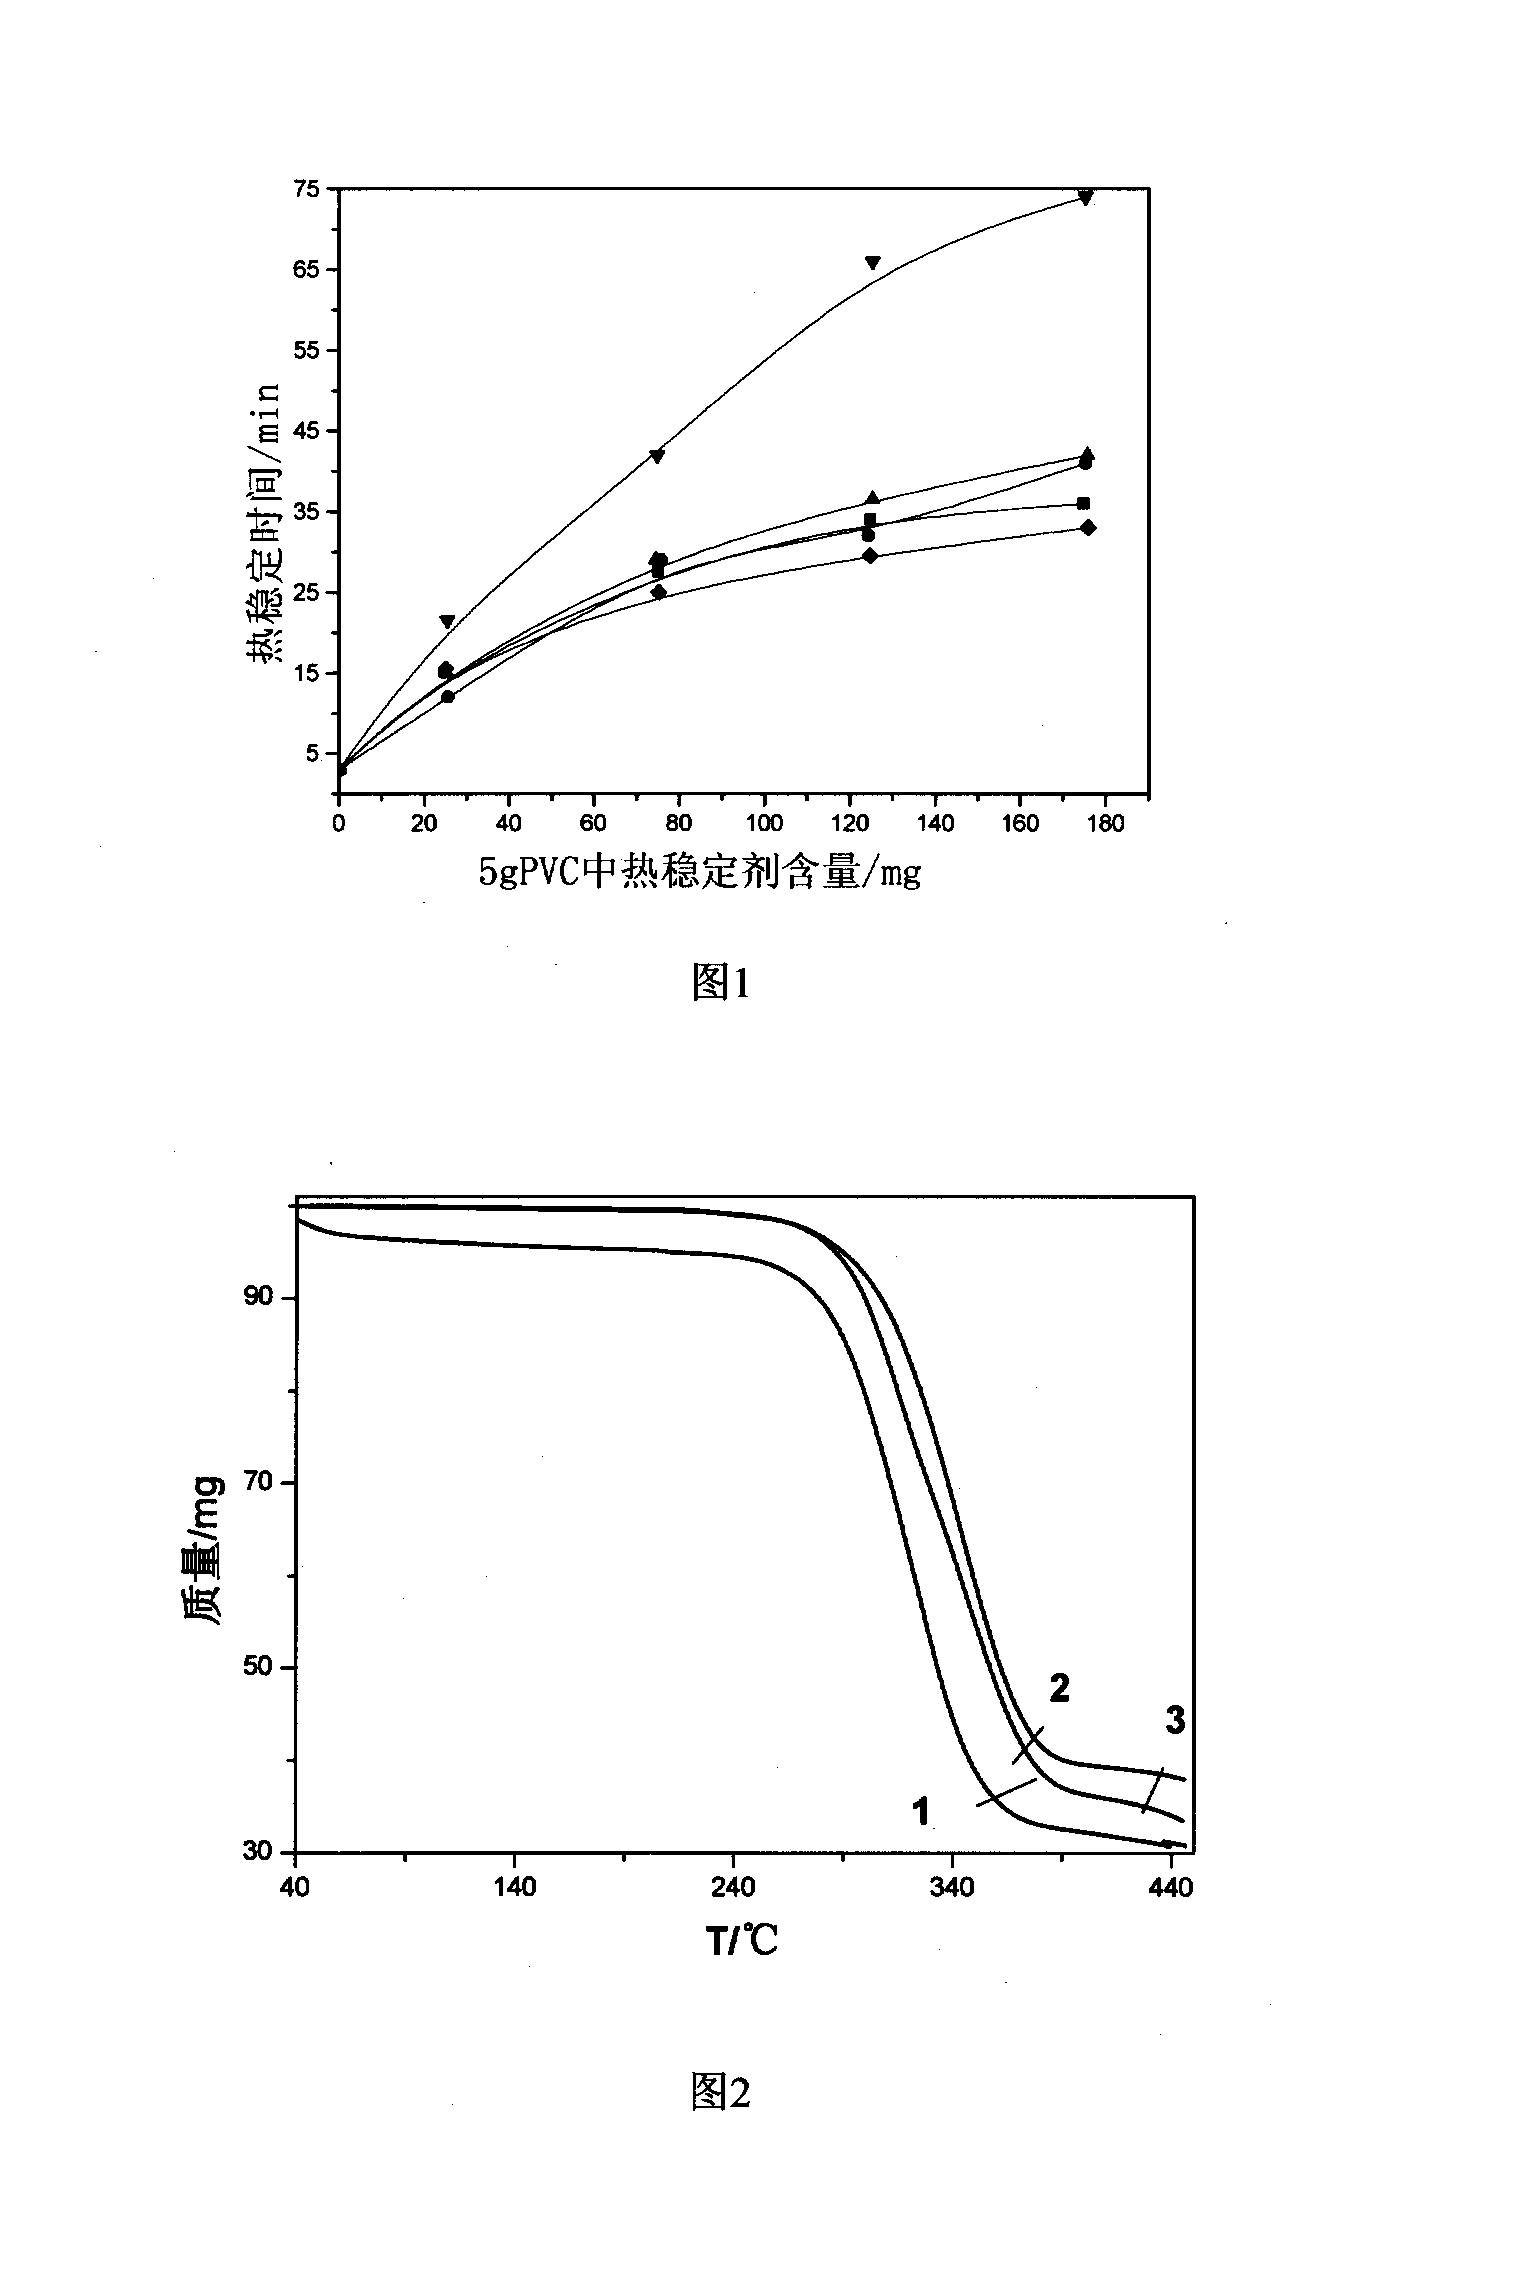 Method for synthesizing PVC thermal stabilizer dicarboxylic acids rear earth salt and uses thereof